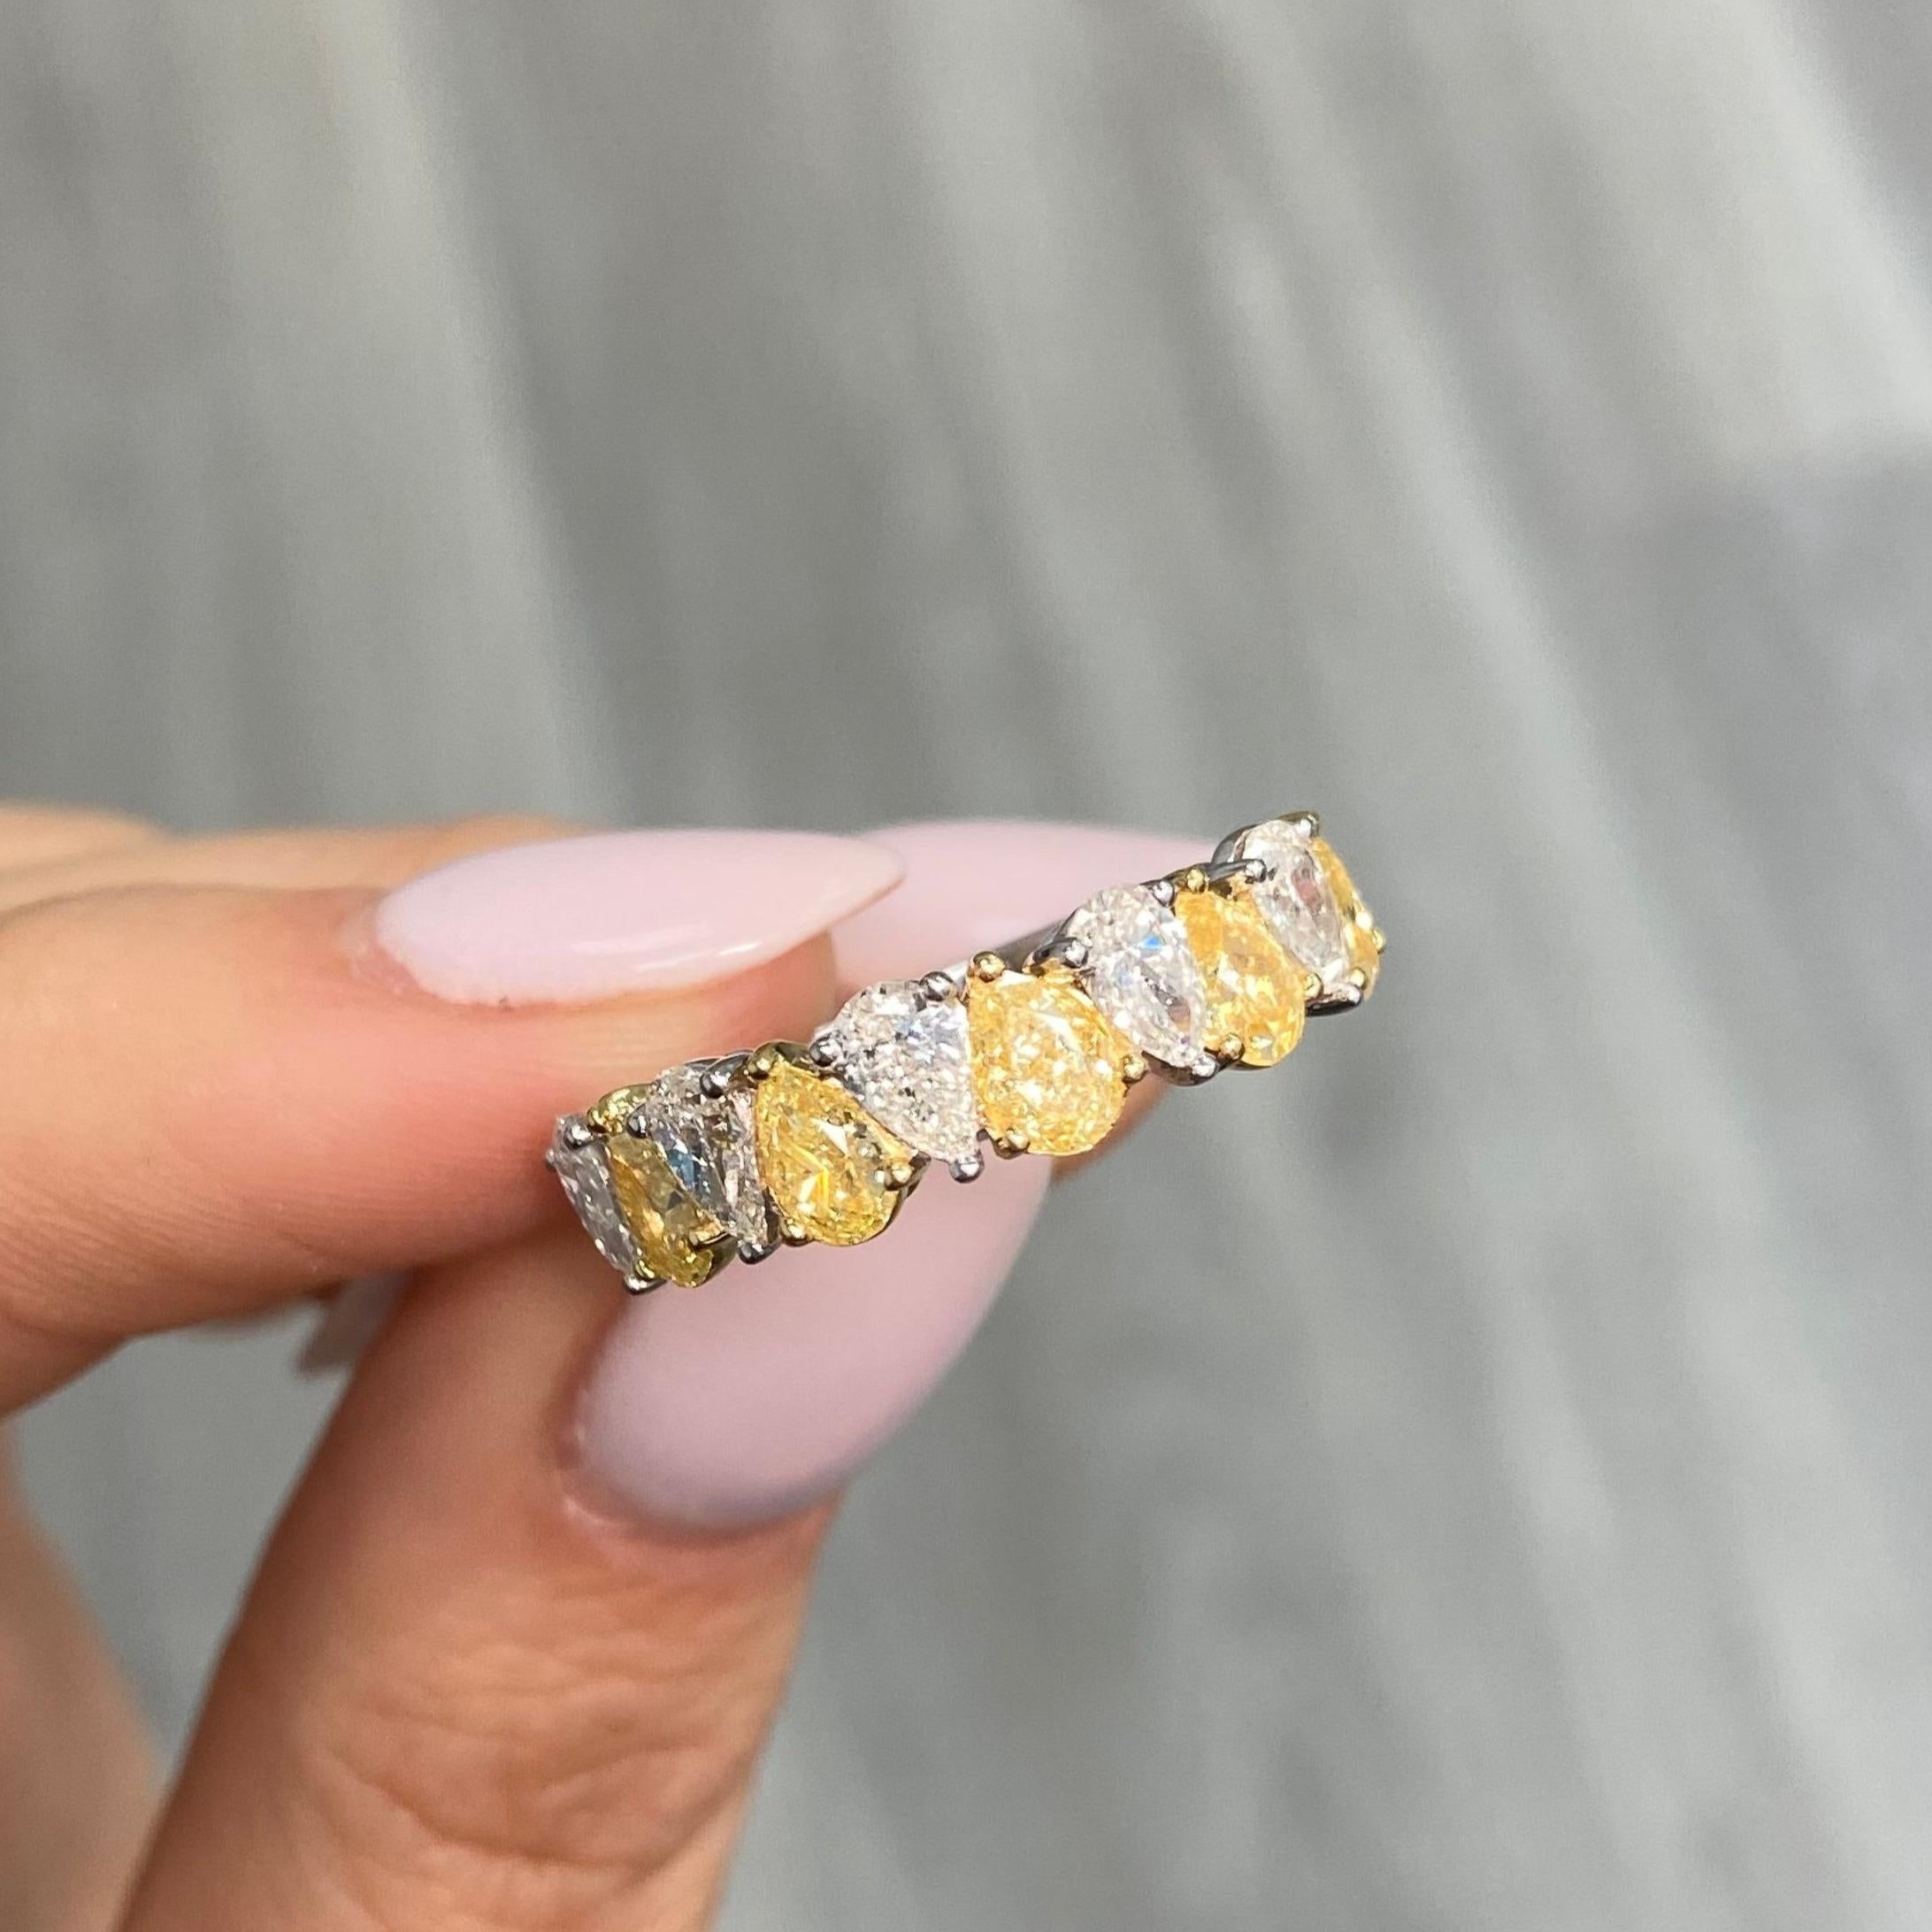 3 Carat Total Weight in the photos. Larger and smaller sizes are available and are made to order.
Fancy Yellow Diamonds
VS-VVS Clarity
Pear Shape
10 Diamonds
Crafted in 18k White Gold
Handmade in NYC
Ready to Ship in 3-4 weeks

This piece can be